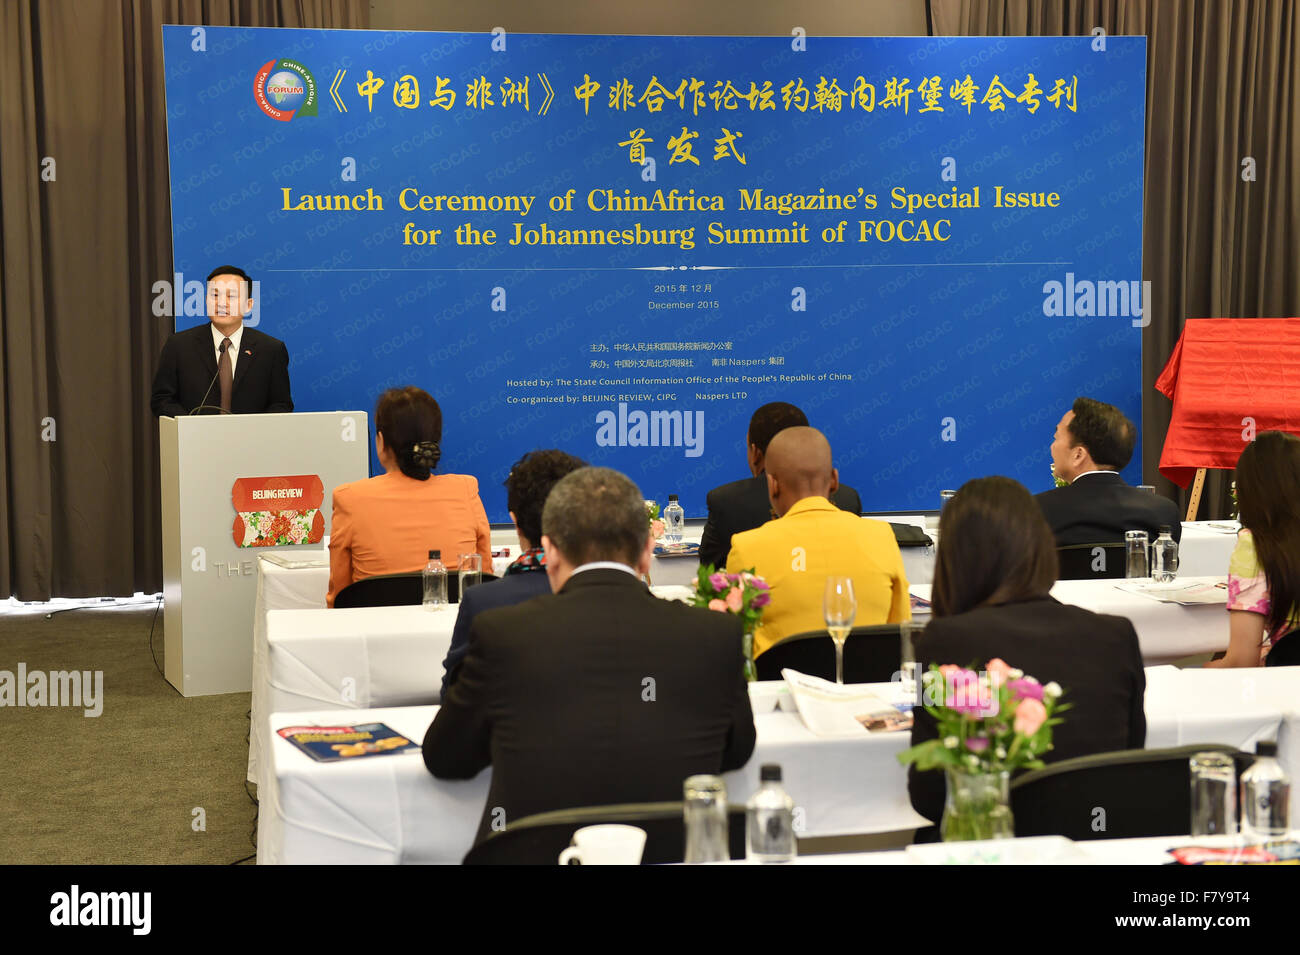 Johannesburg, South Africa. 3rd Dec, 2015. Launch ceremony of the ChinAfrica magazine's special issue for the upcoming Johannesburg summit of the Forum on China-Africa Cooperation (FOCAC), in Johannesburg, South Africa. ChinAfrica is a monthly magazine in Africa issued by China International Publishing Group. (Xinhua/Sun Ruibo) © Xinhua/Alamy Live News Stock Photo